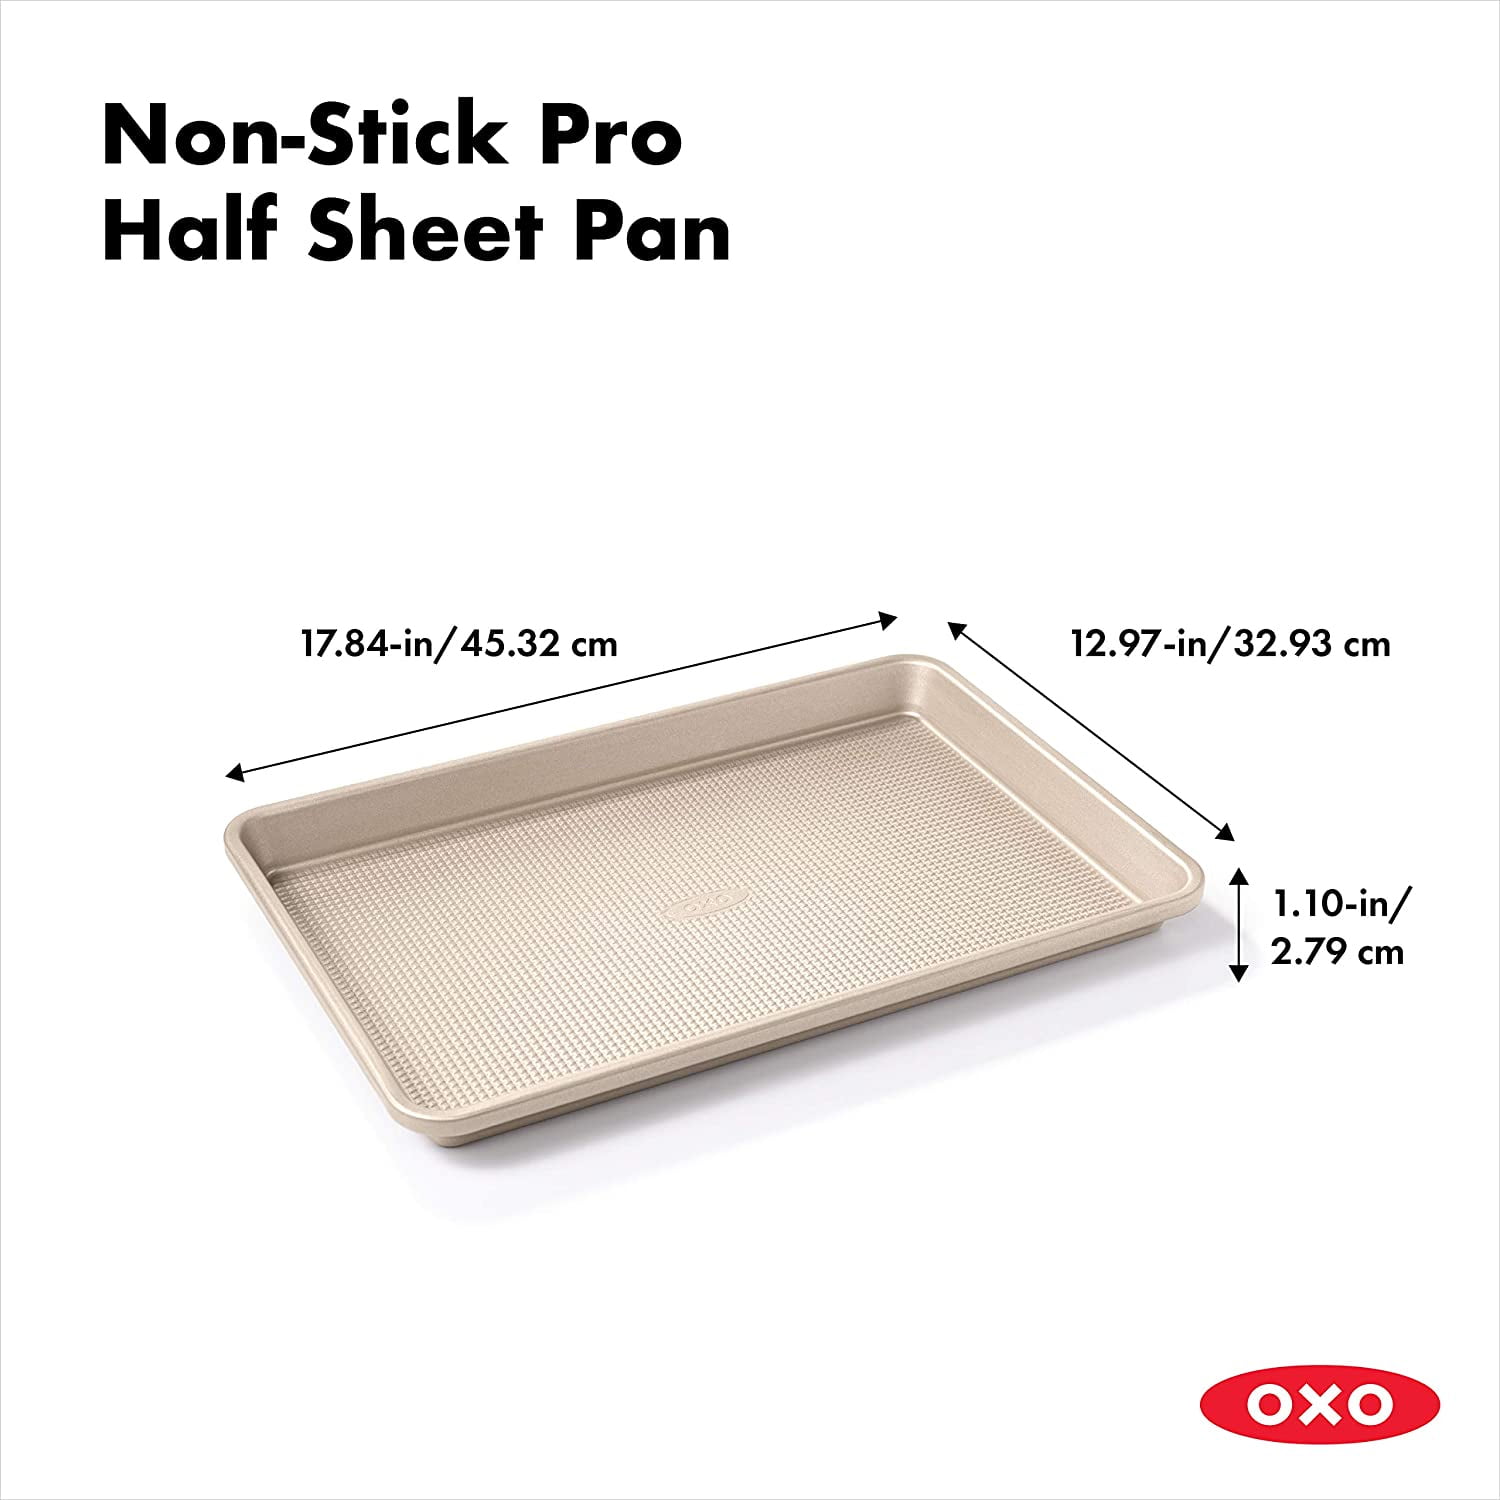 OXO Good Grips Non-Stick Pro 13in x 18in Half Sheet Pan - Kitchen & Company